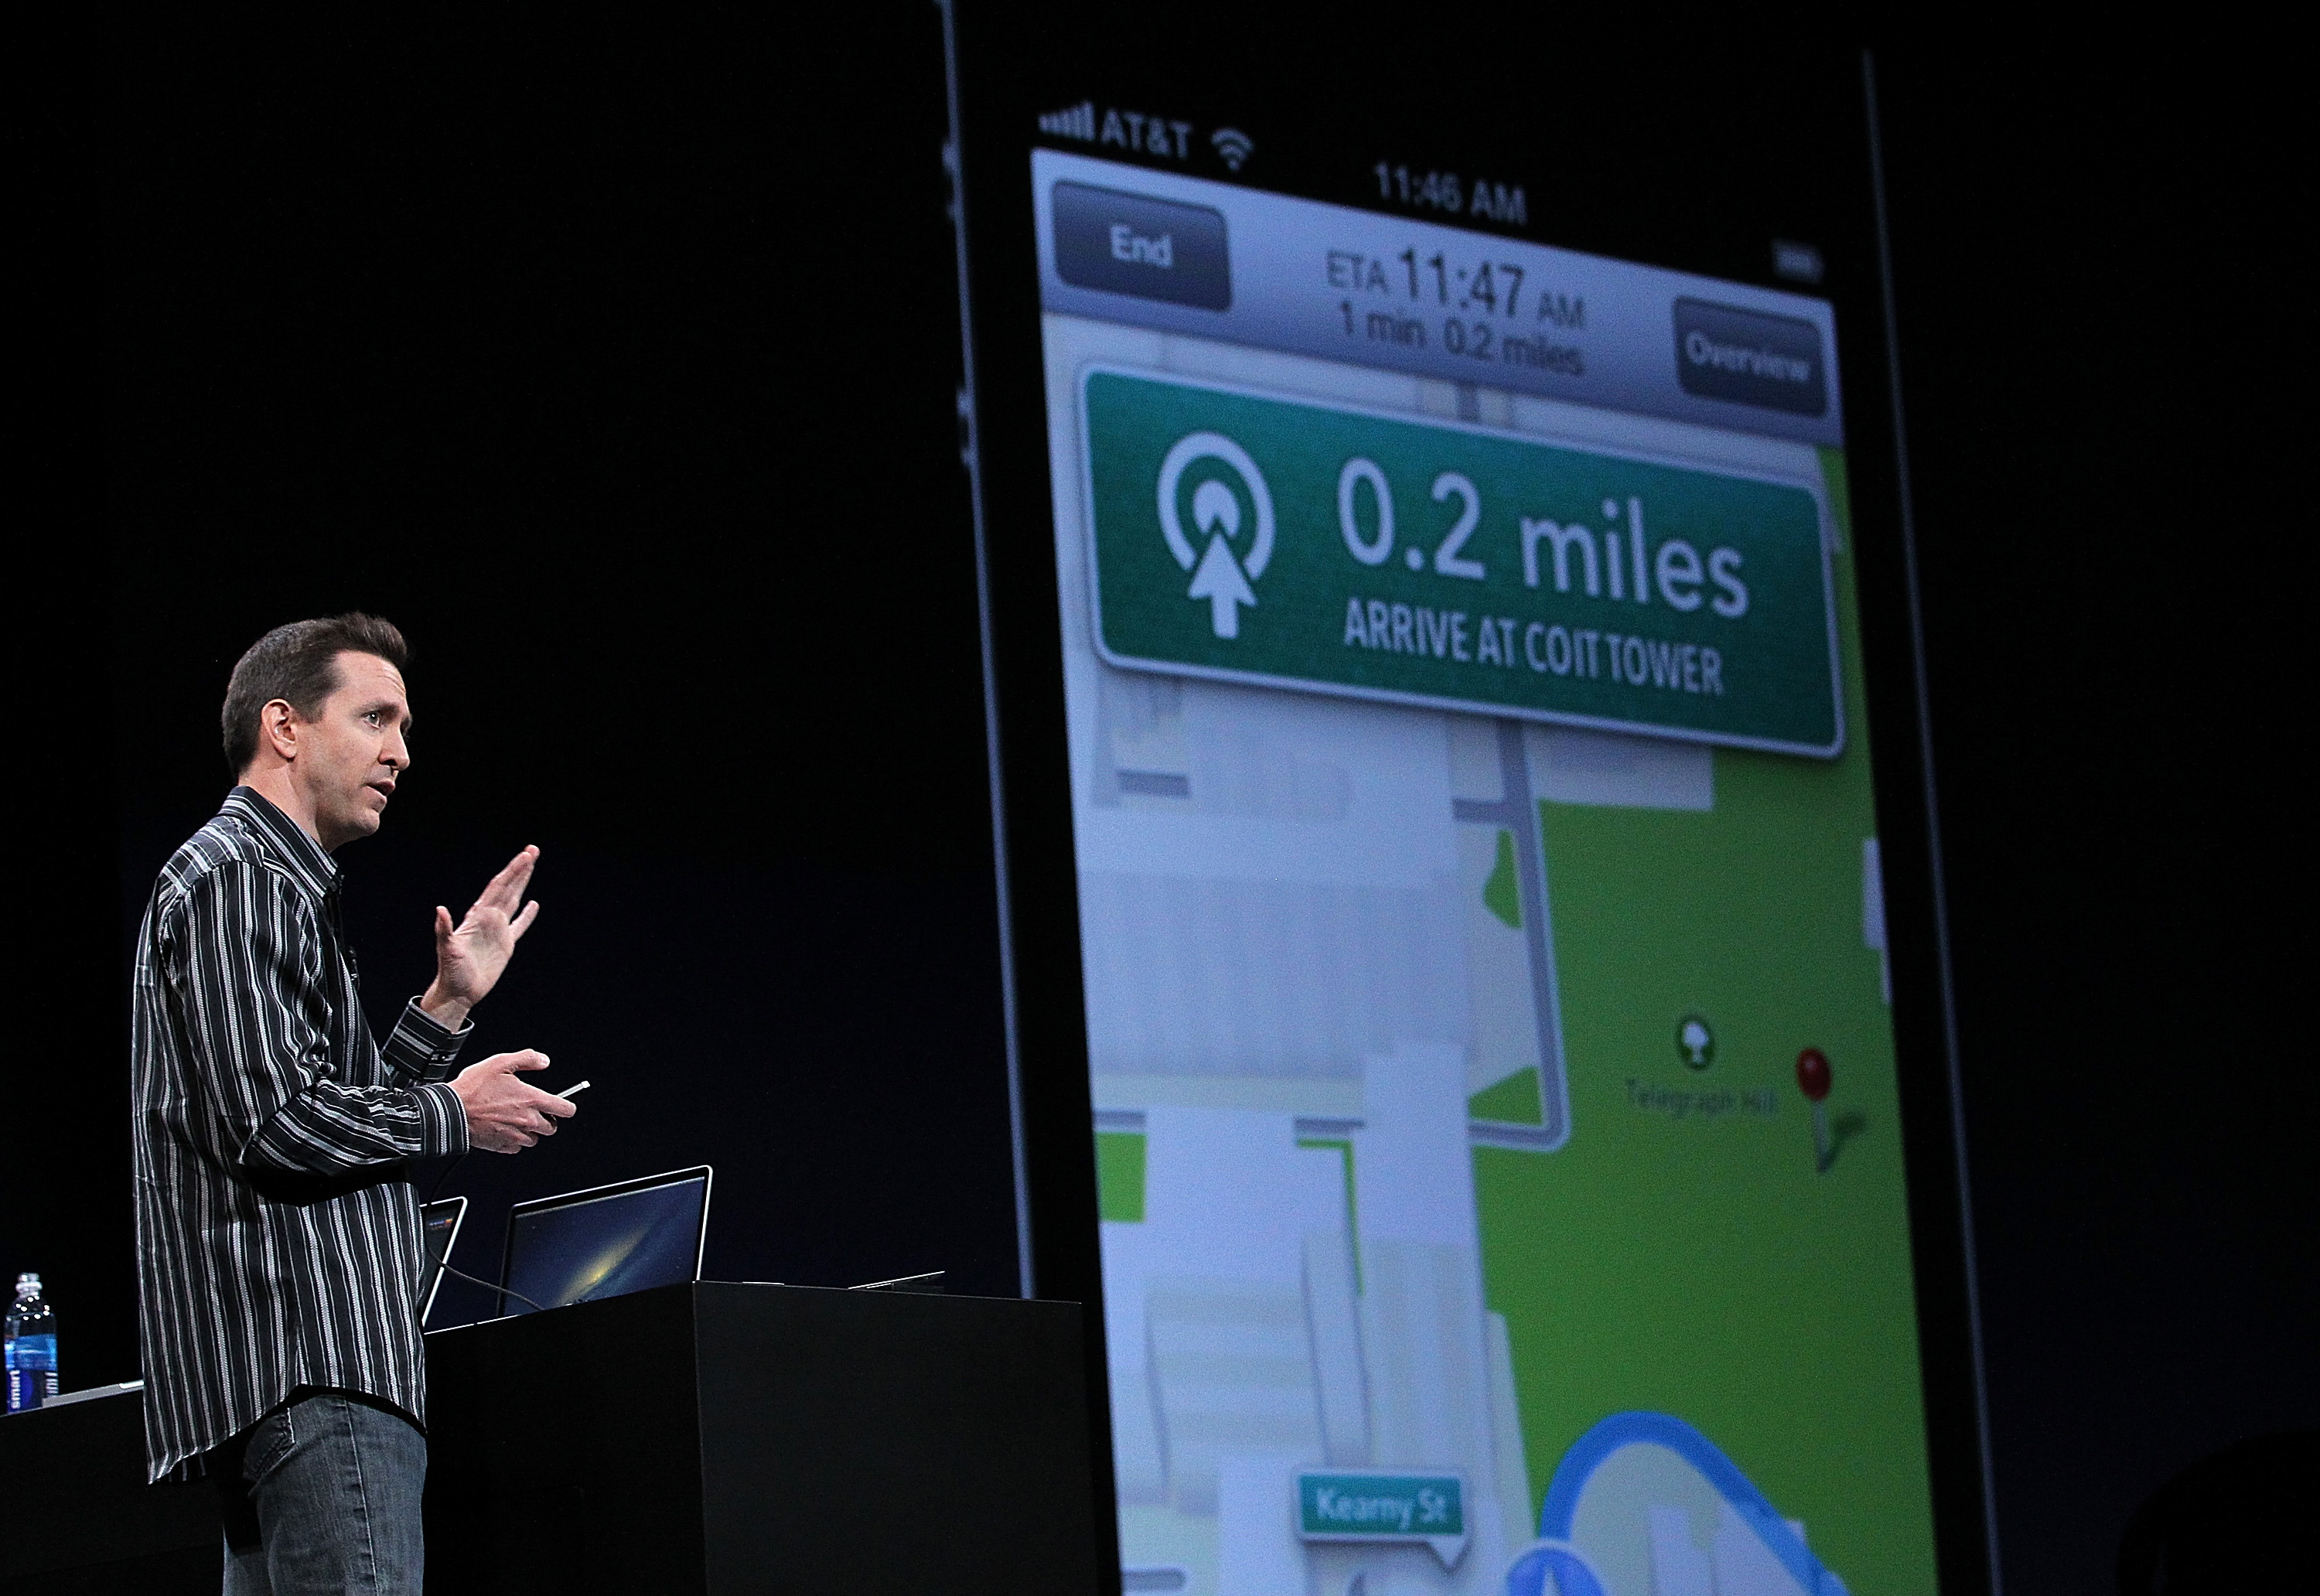 Apple Senior VP of iPhone Software Scott Forstall demonstrates the new map application featured on iOS 6  during the keynote address during the 2012 Apple WWDC keynote address at the Moscone Center on June 11, 2012 in San Francisco, California. (Justin Sullivan—Getty Images)